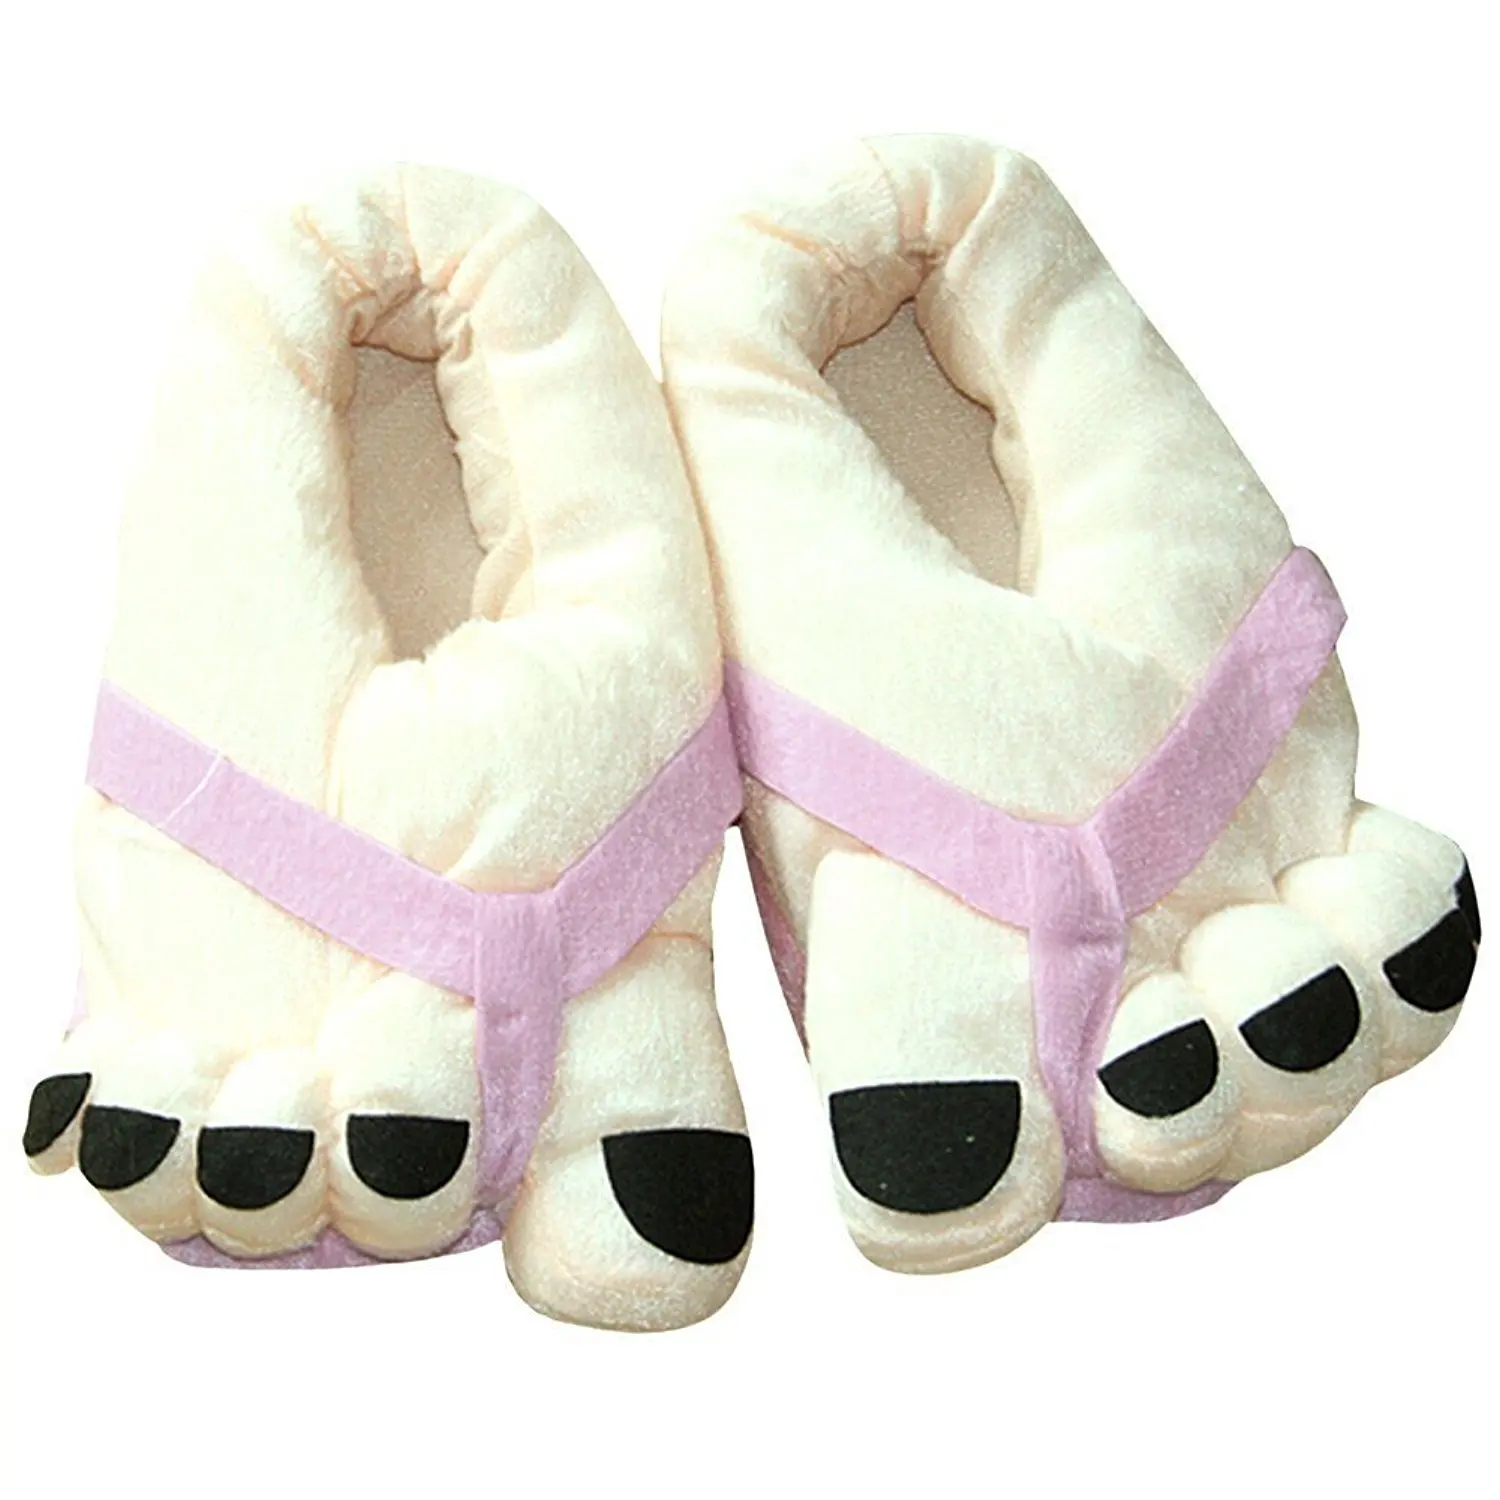 funny adult slippers